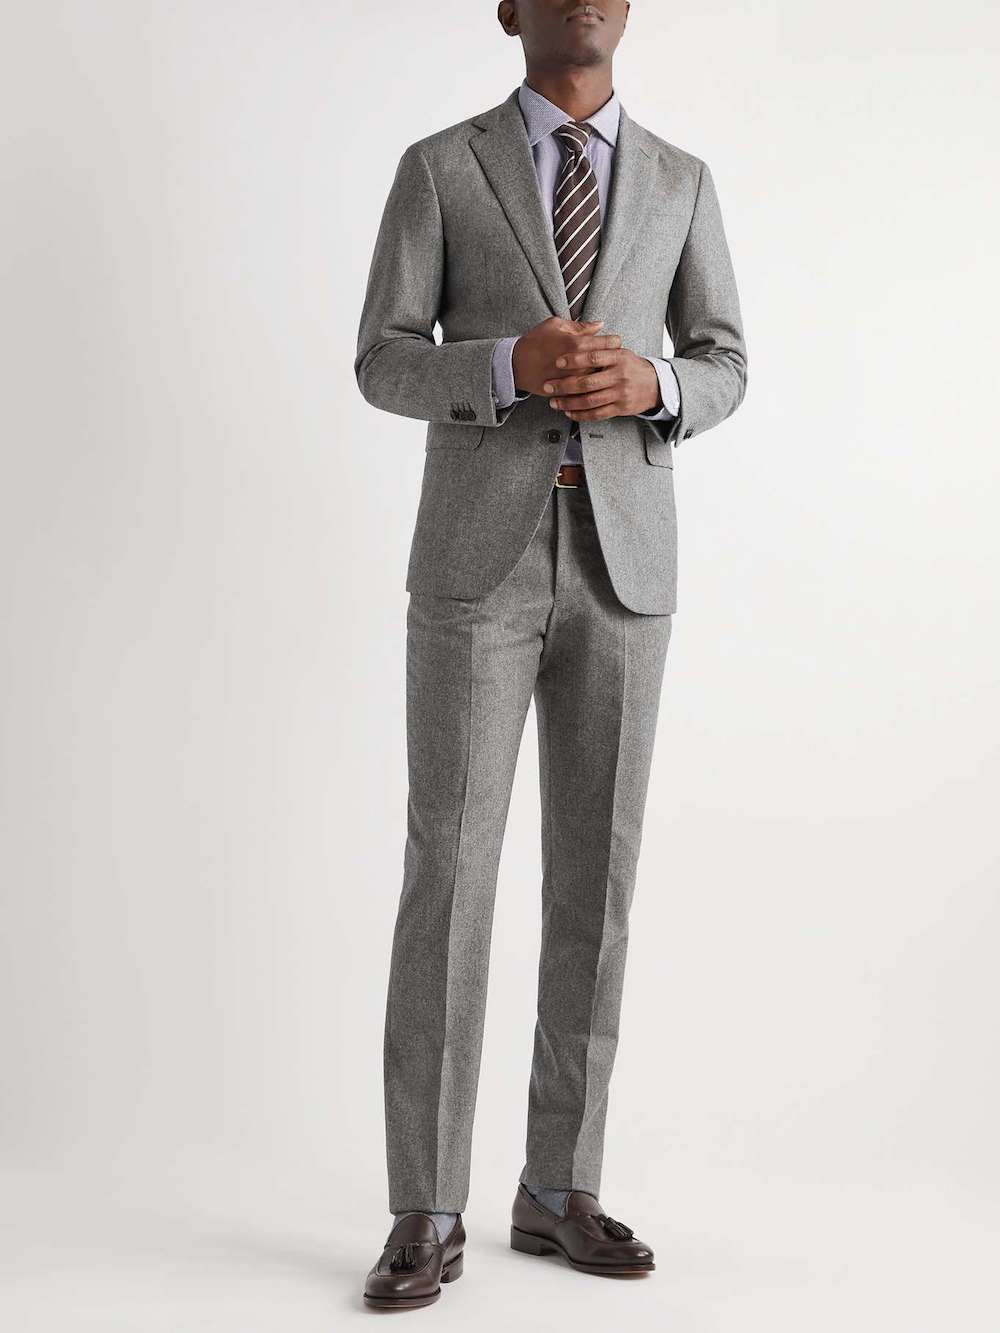 Grey Pants Brown Shoes | Elevated Slacks & Leather Shoes - Nimble Made